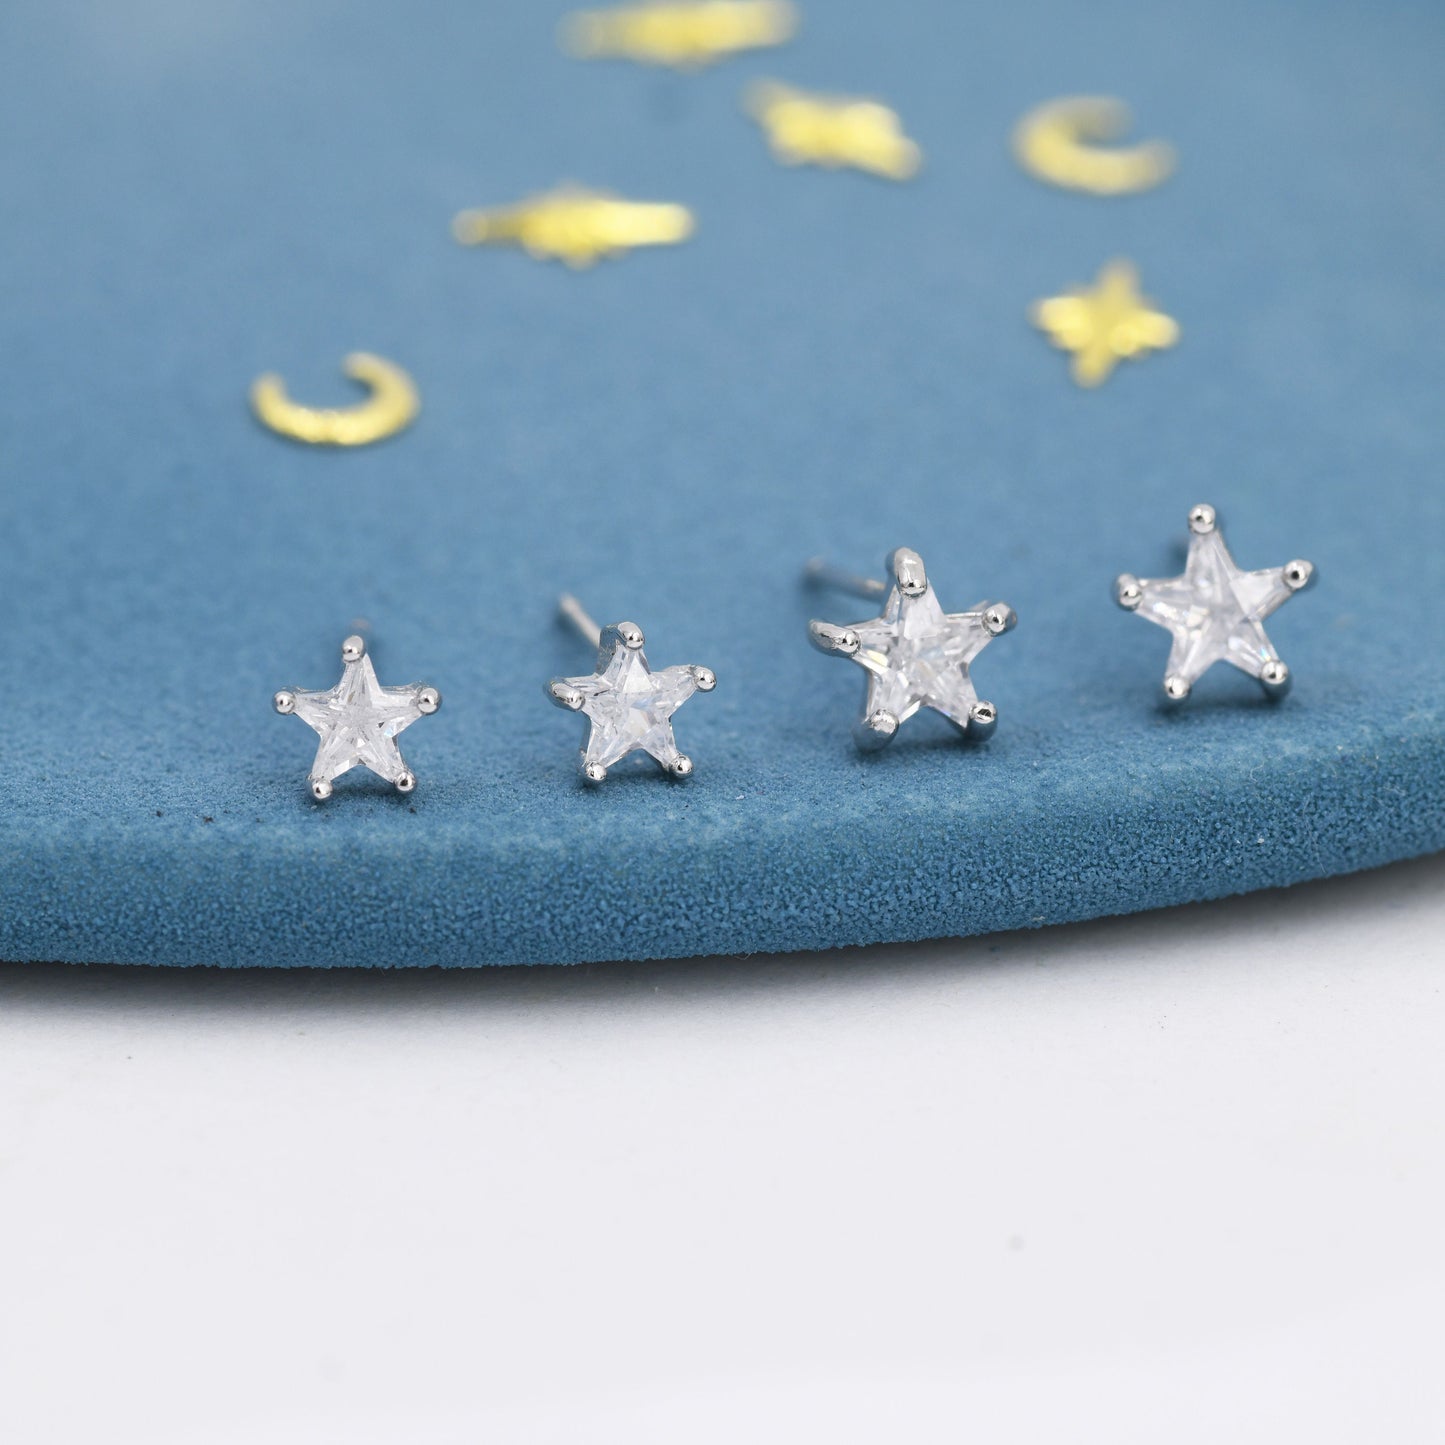 CZ Star Stud Earrings in Sterling Silver, Silver or Gold, Tiny Star Earrings, Solid Silver Small Crystal Star Earrings